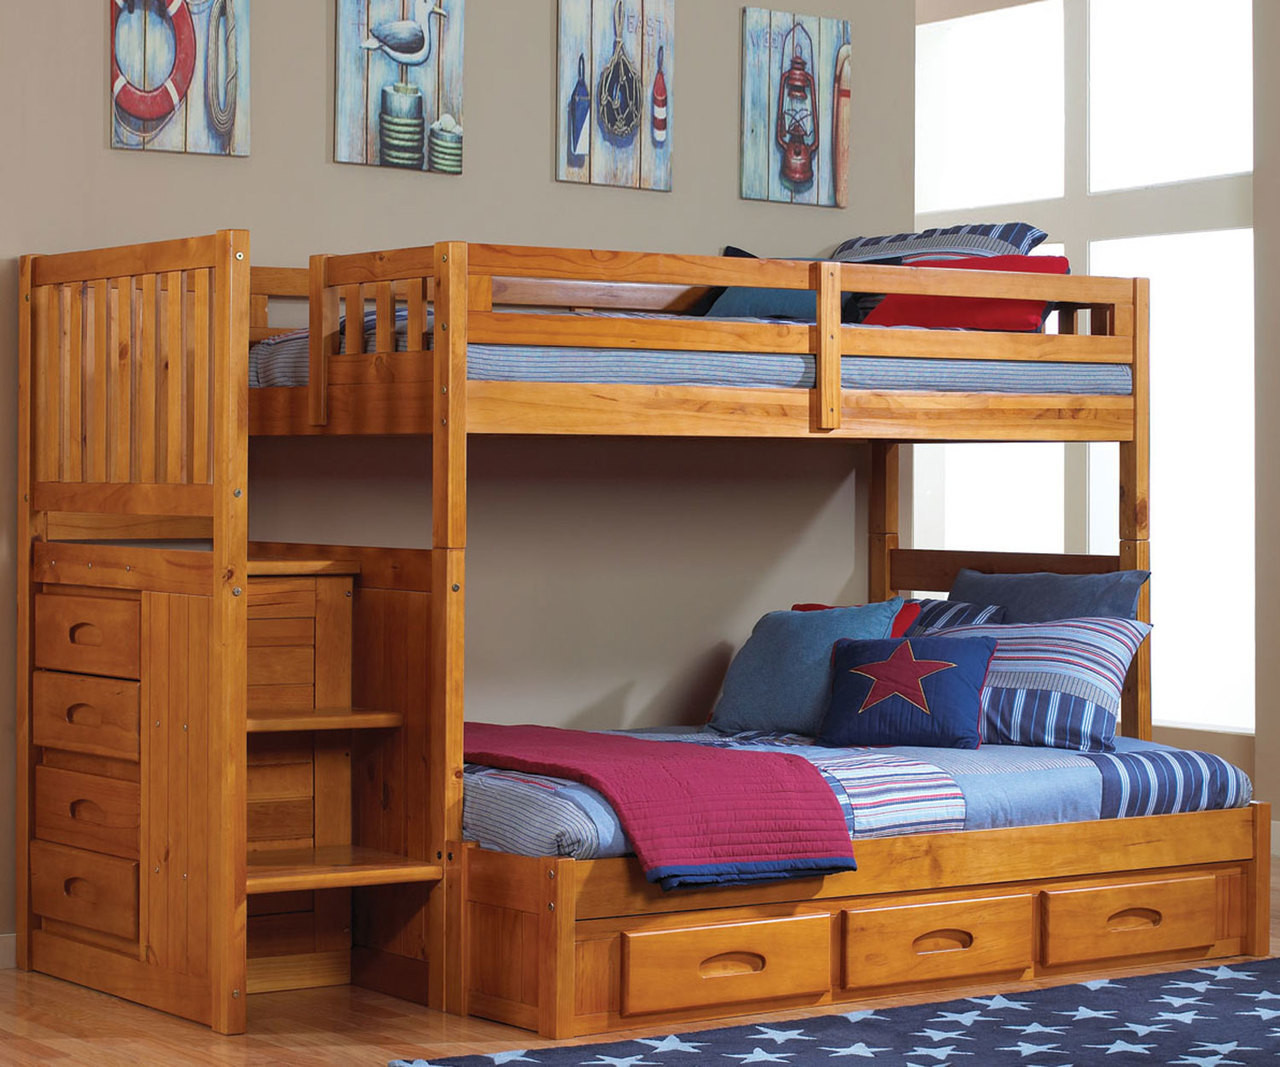 Kids Loft Bedroom Set
 Buy Honey collection Mission Kids Bunk Beds with Stairs